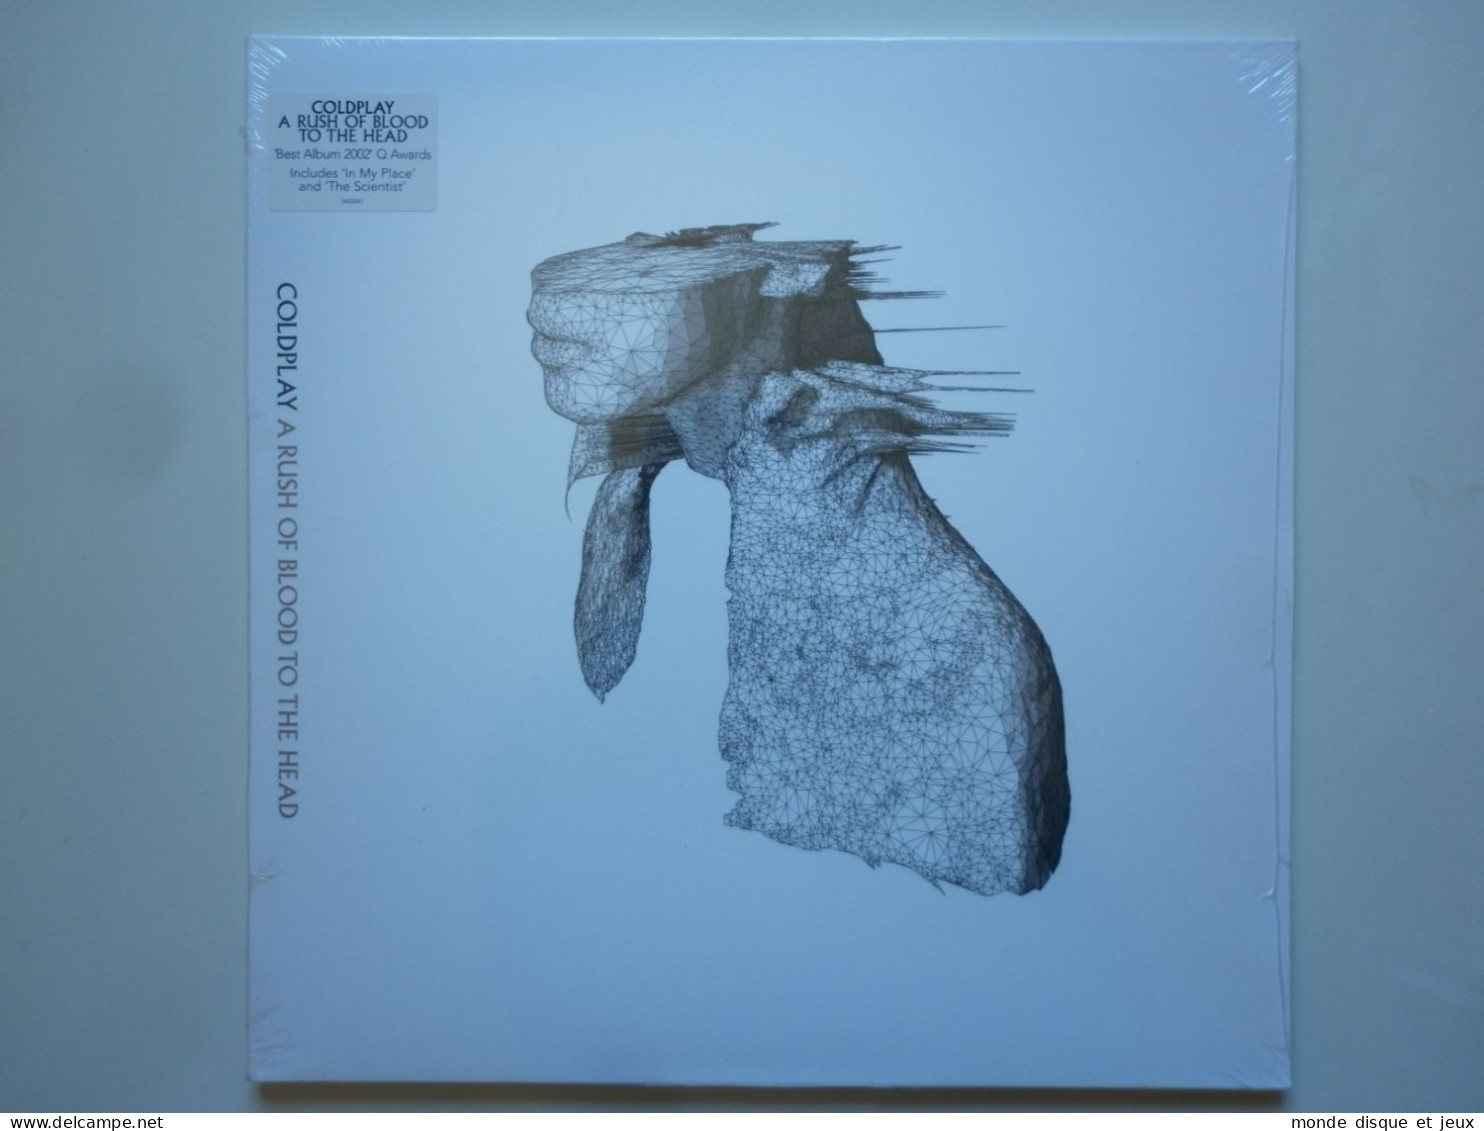 Coldplay Album 33Tours Vinyle A Rush Of Blood To The Head - Altri - Francese